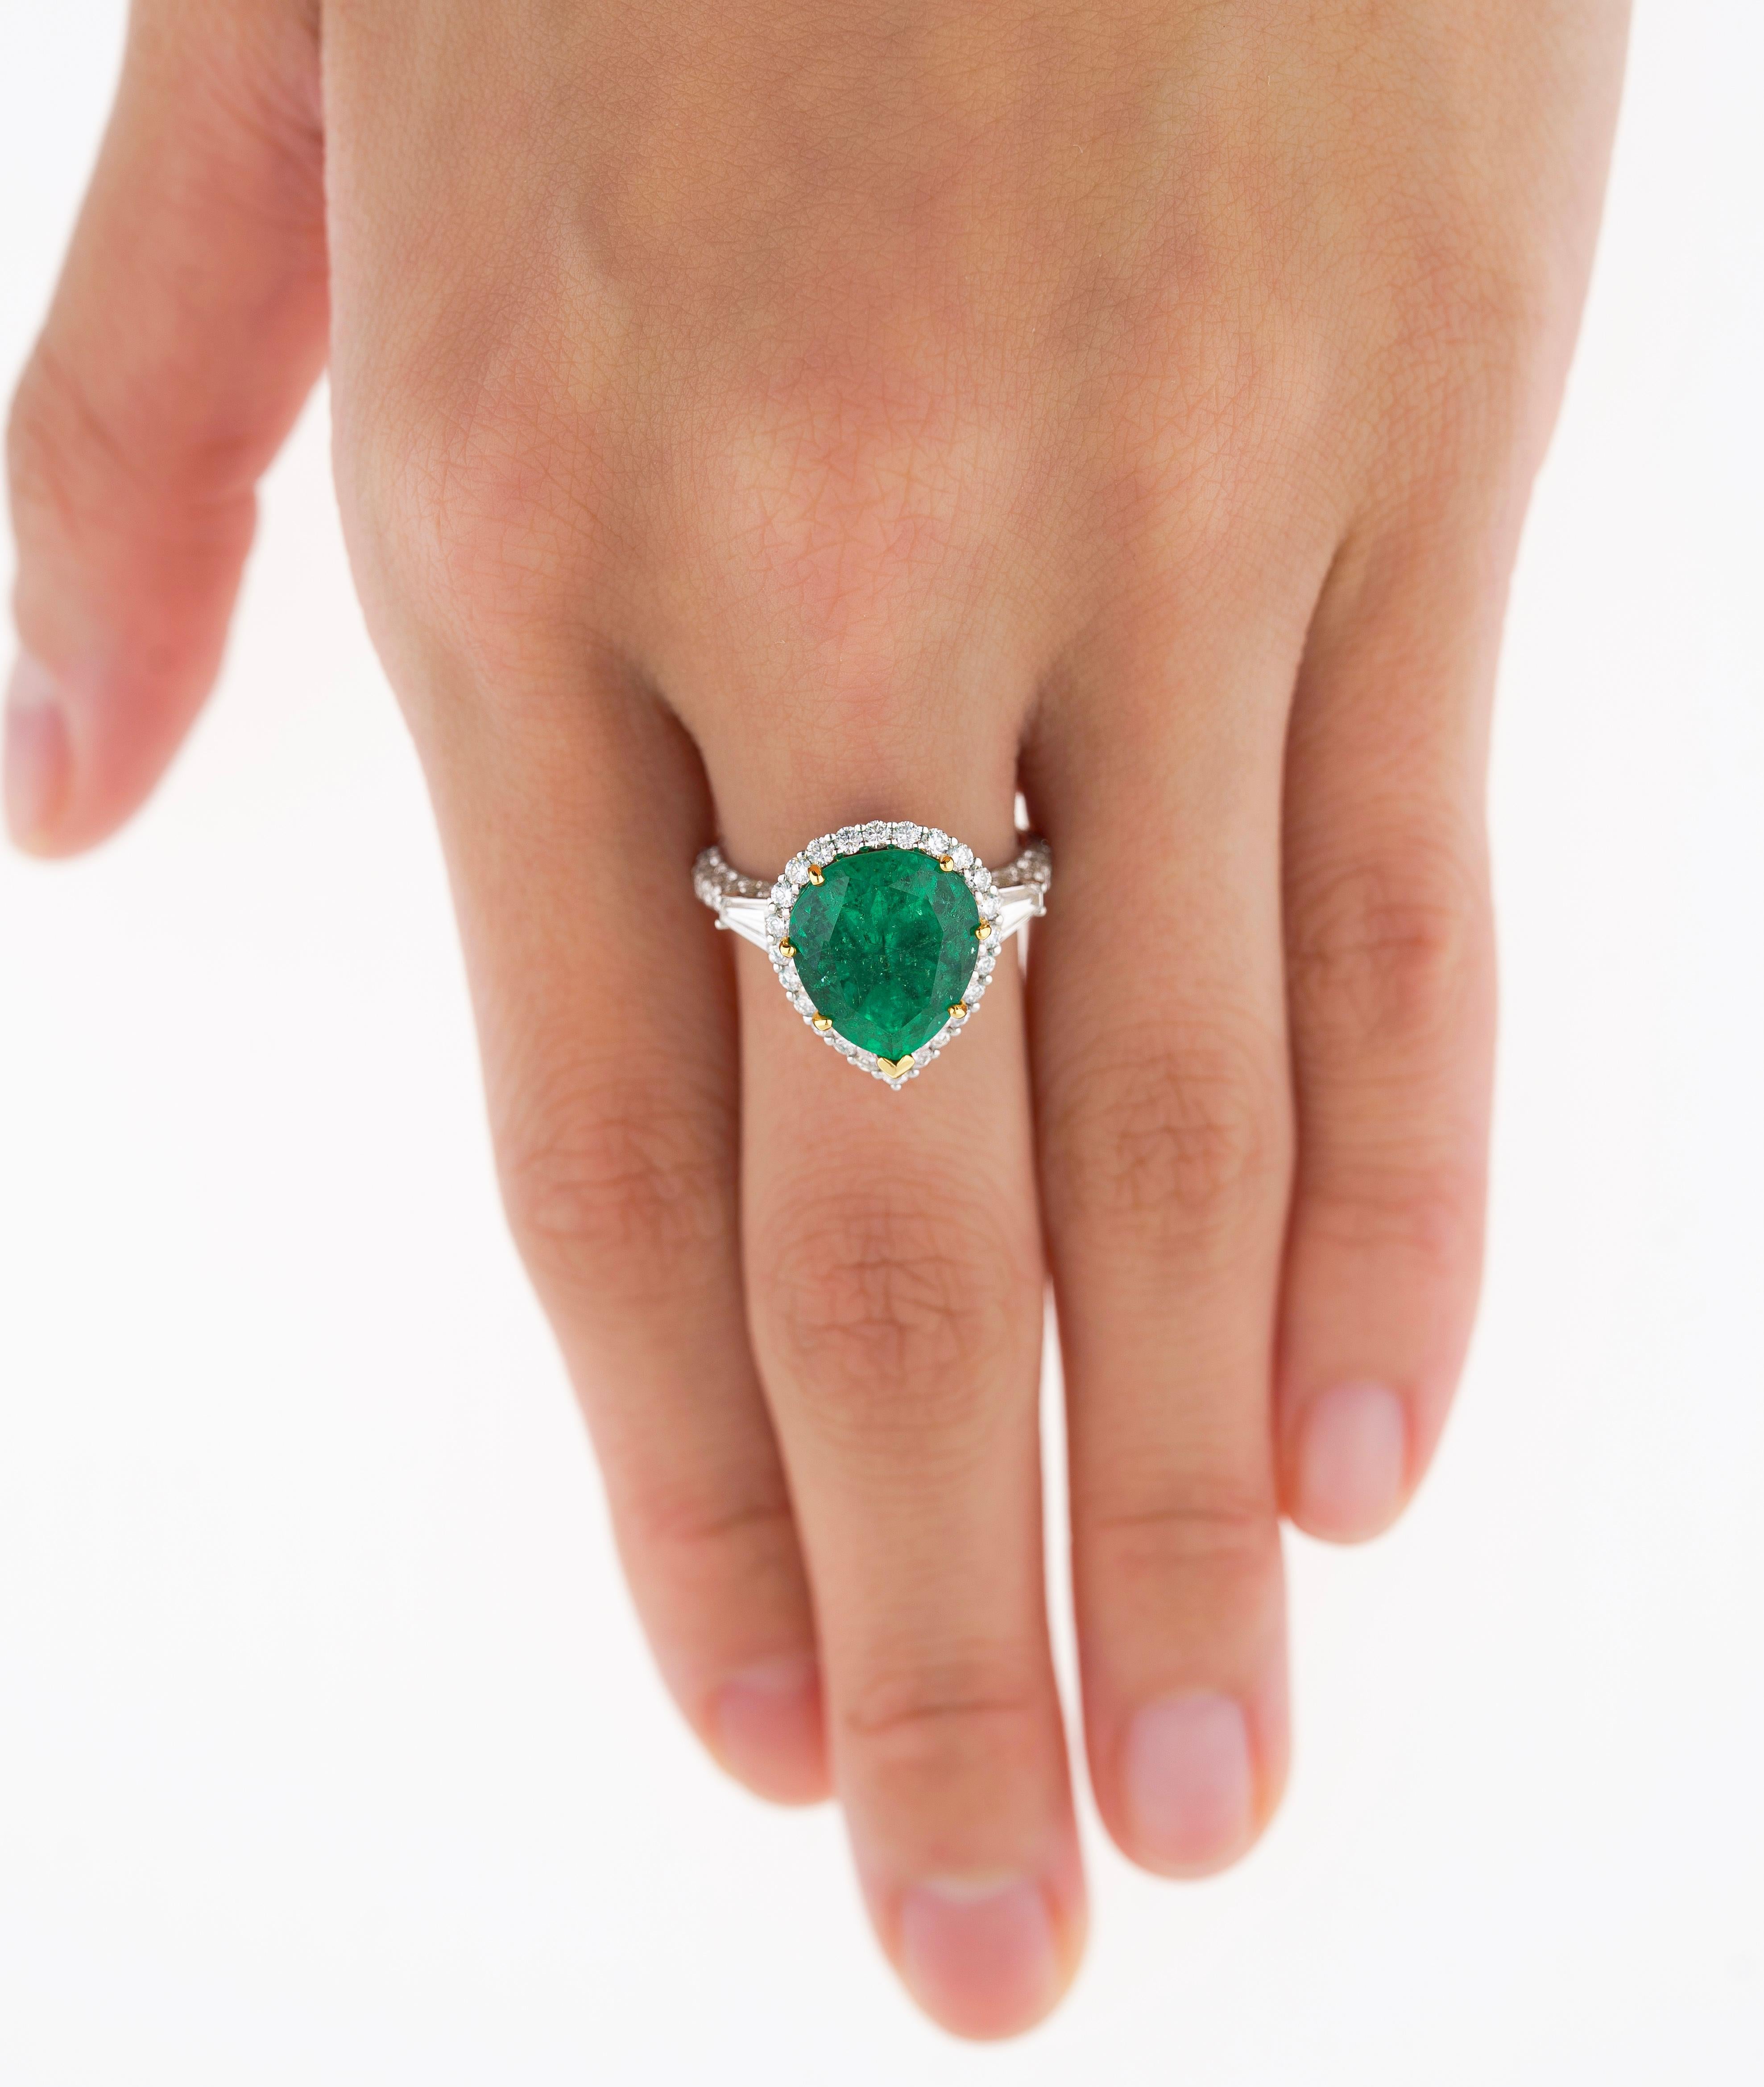 5.12 Carat Vivid Green Pear Cut Colombian Emerald and Diamond Ring in 18K Gold For Sale 5